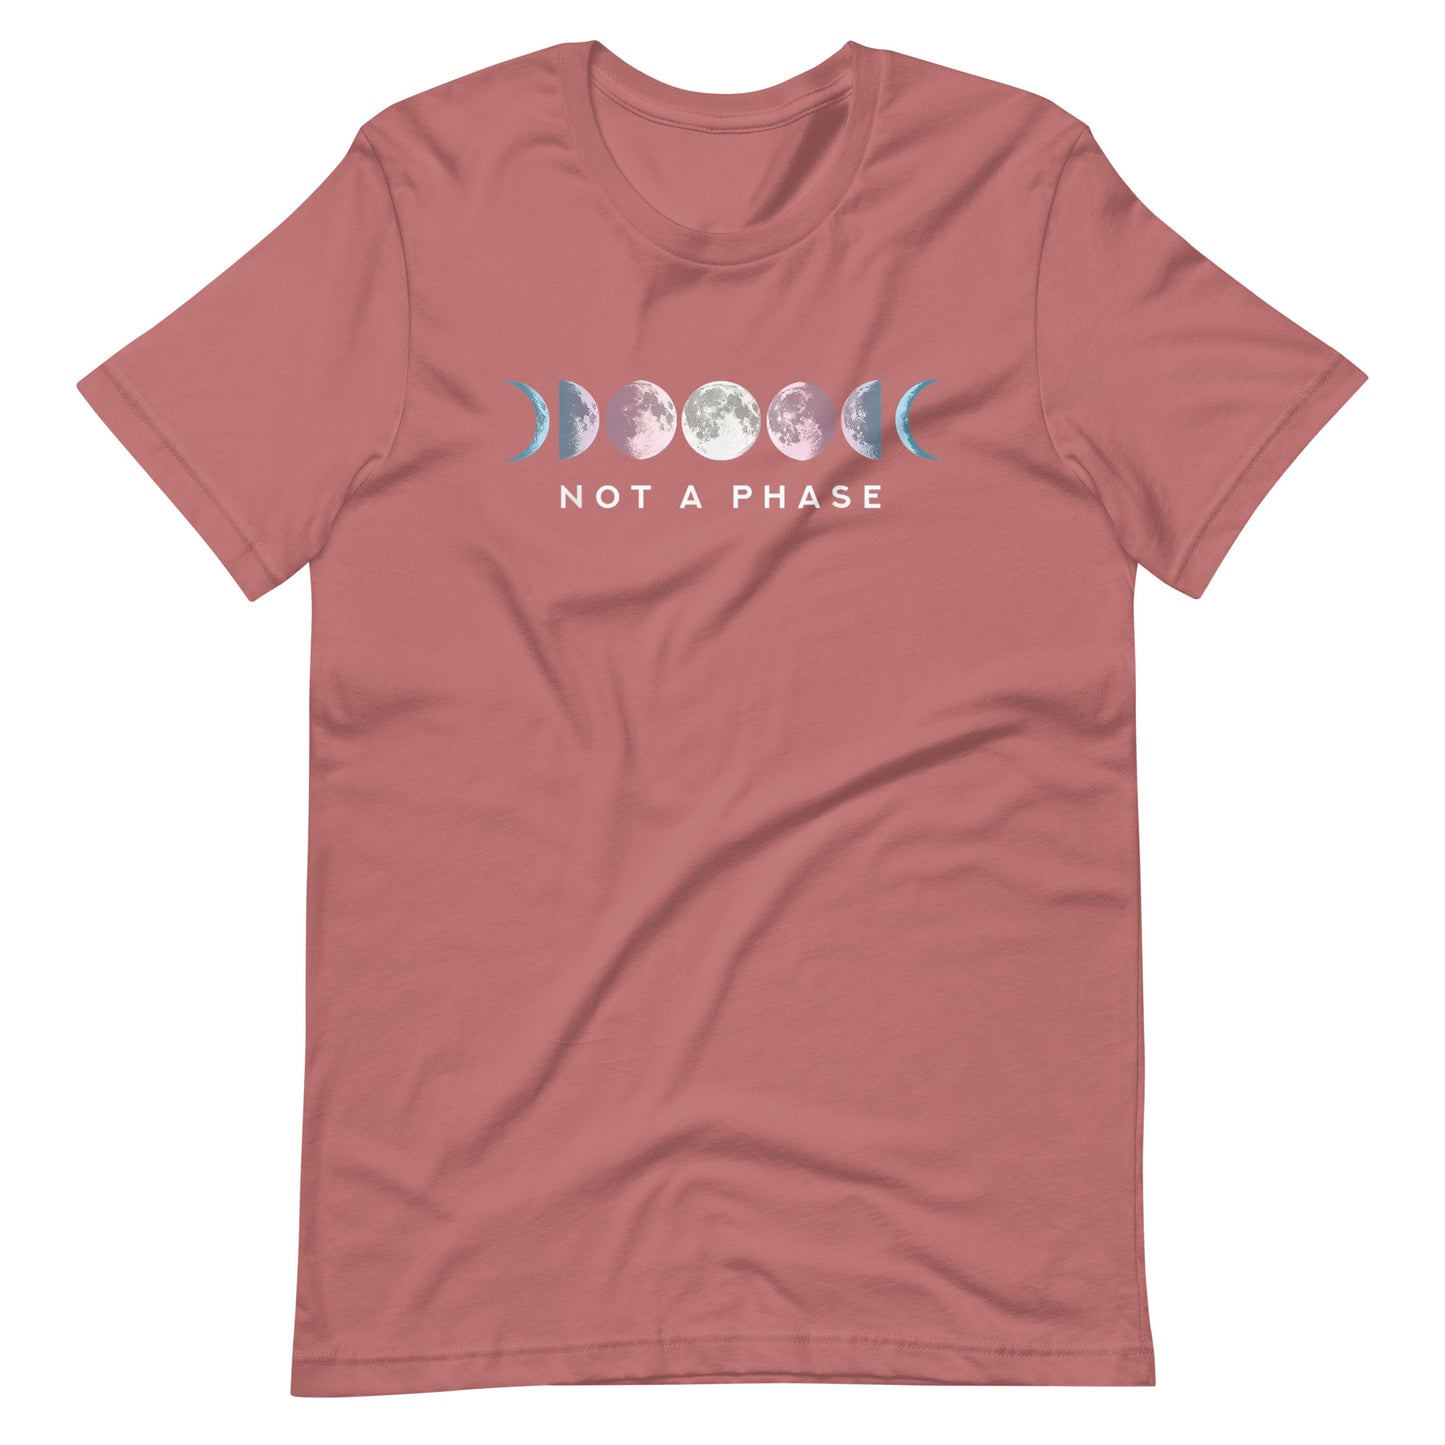 Not a Phase Transsexual Flag T-Shirt - gay pride apparel